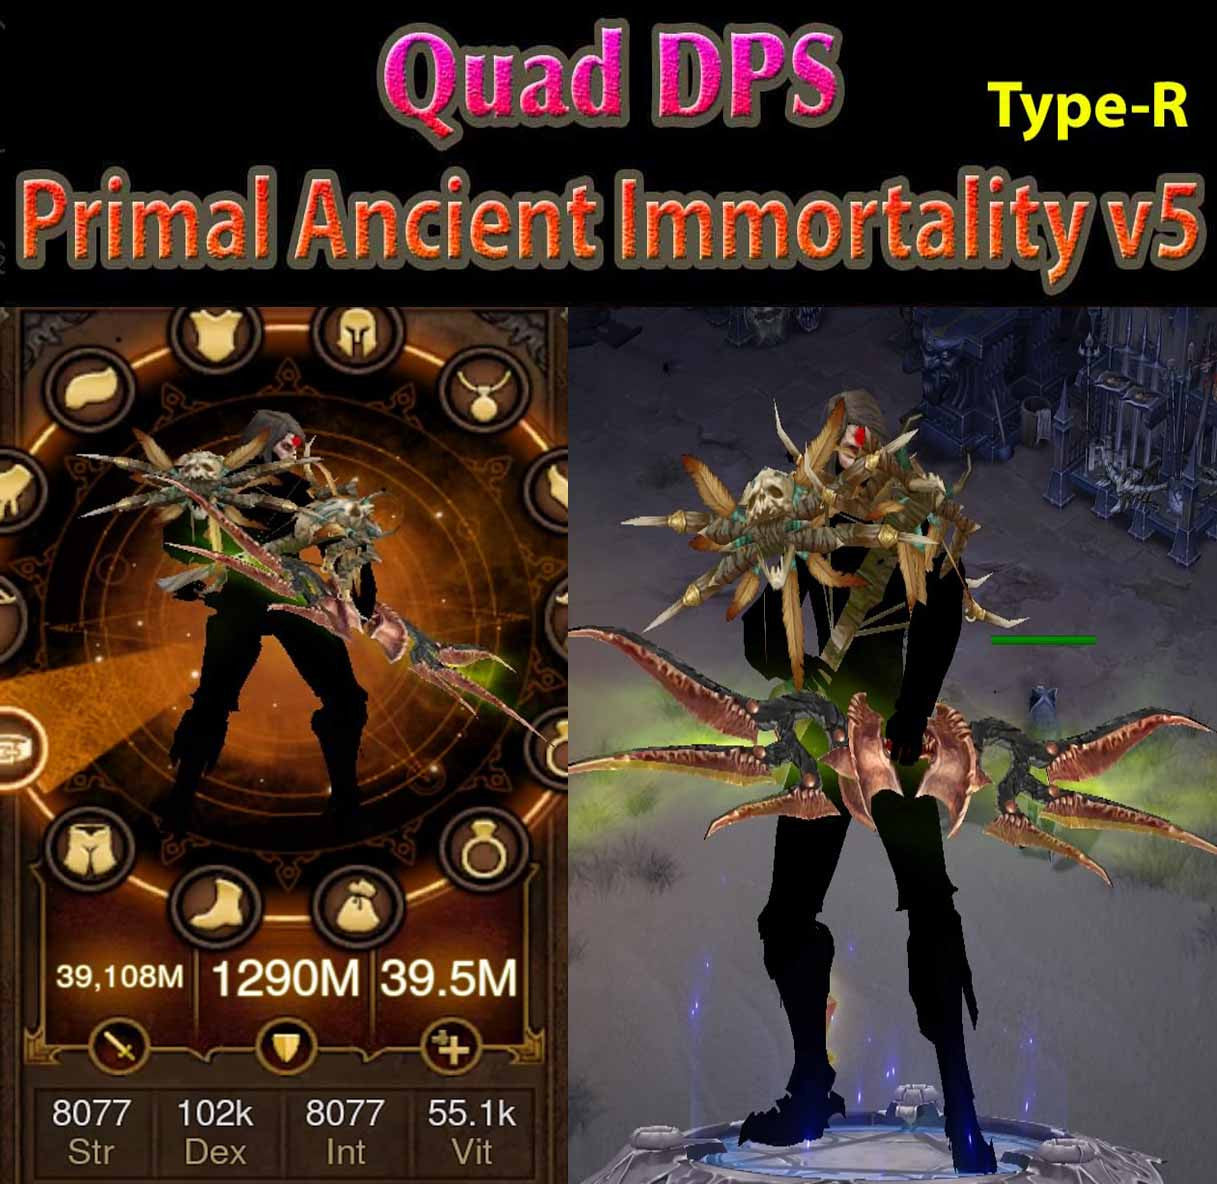 [Primal Ancient] [Quad DPS] Diablo 3 Immortal v5 Type-R Speed Strafe Demon Hunter Striker Diablo 3 Mods ROS Seasonal and Non Seasonal Save Mod - Modded Items and Gear - Hacks - Cheats - Trainers for Playstation 4 - Playstation 5 - Nintendo Switch - Xbox One